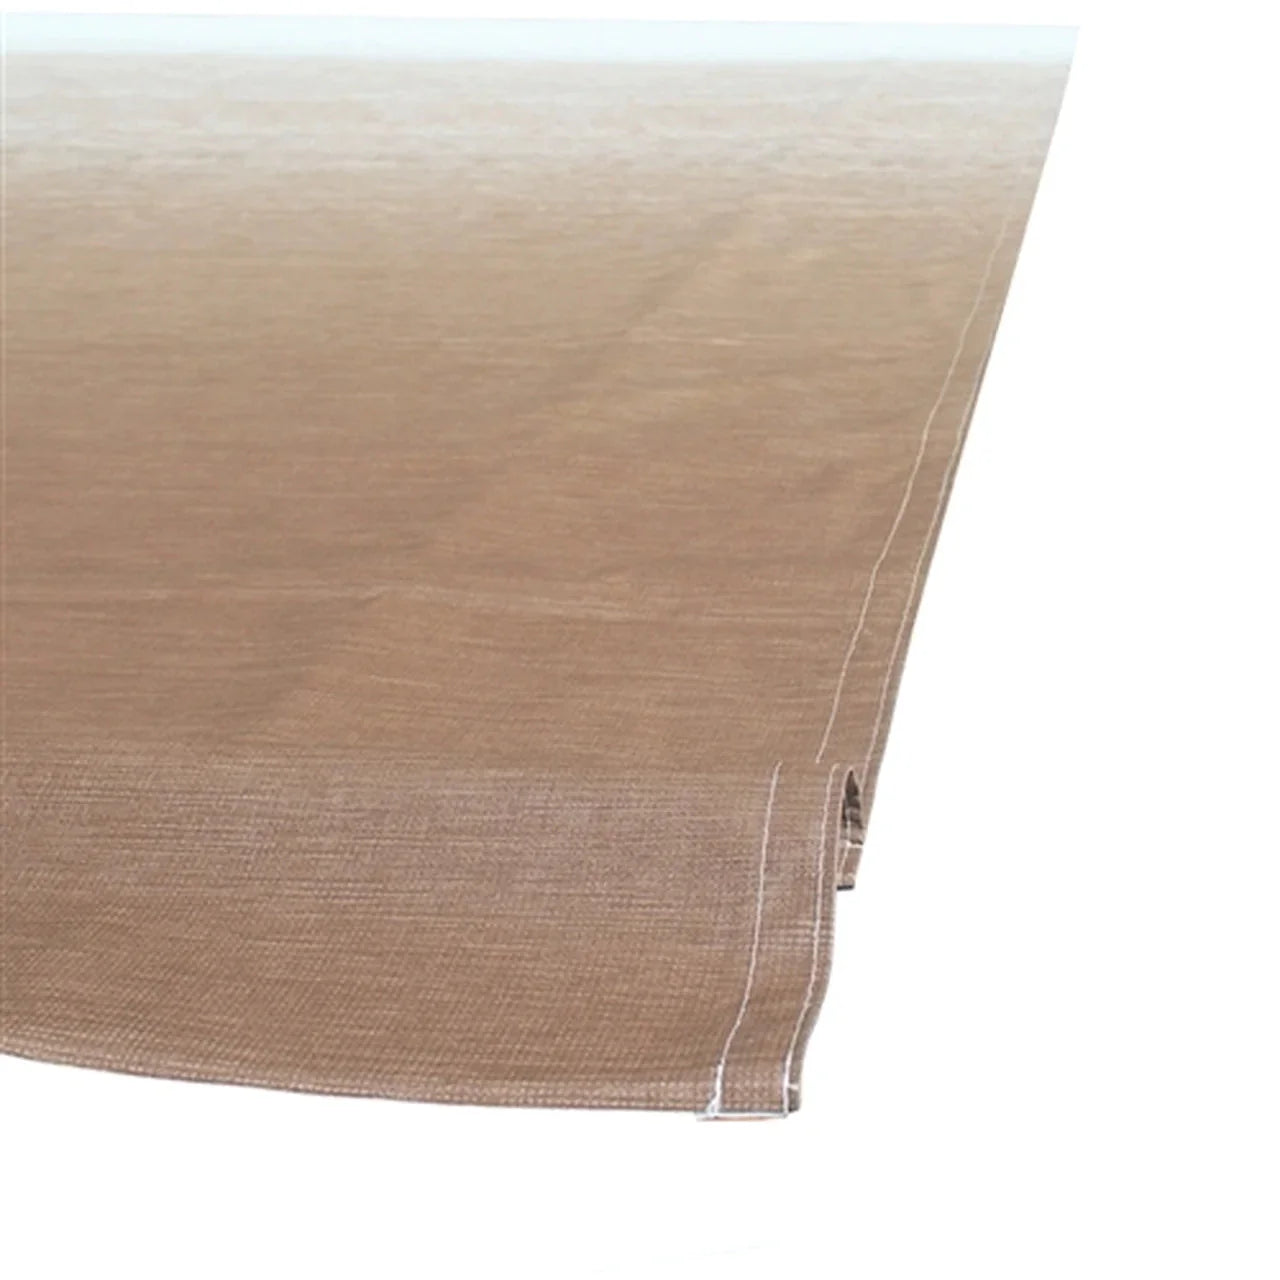 Aleko RV Awning Fabric Replacement - 16 X 8 ft (4.9 x 2.4 m)